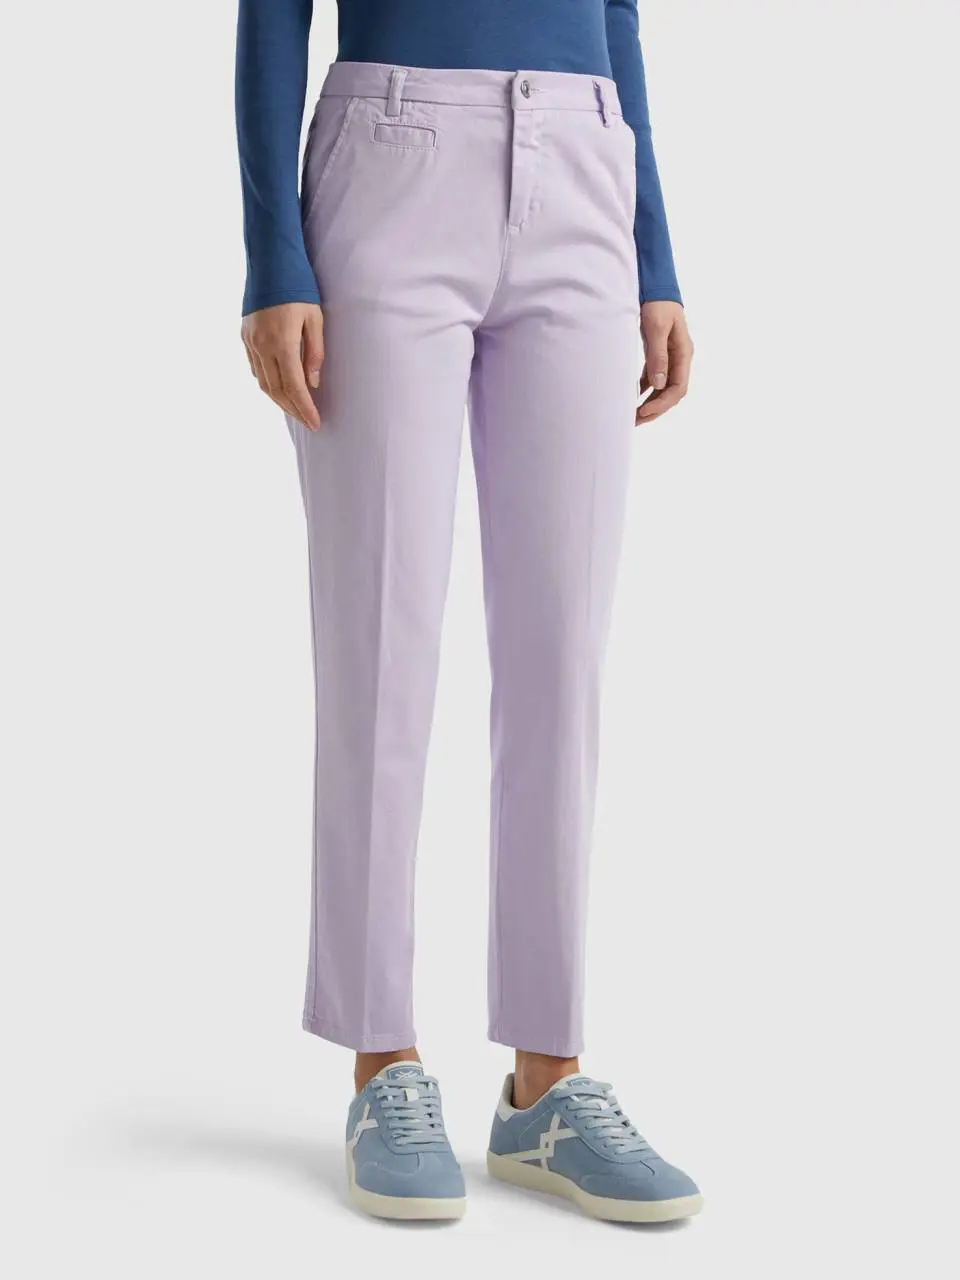 Benetton lilac slim fit cotton chinos. 1